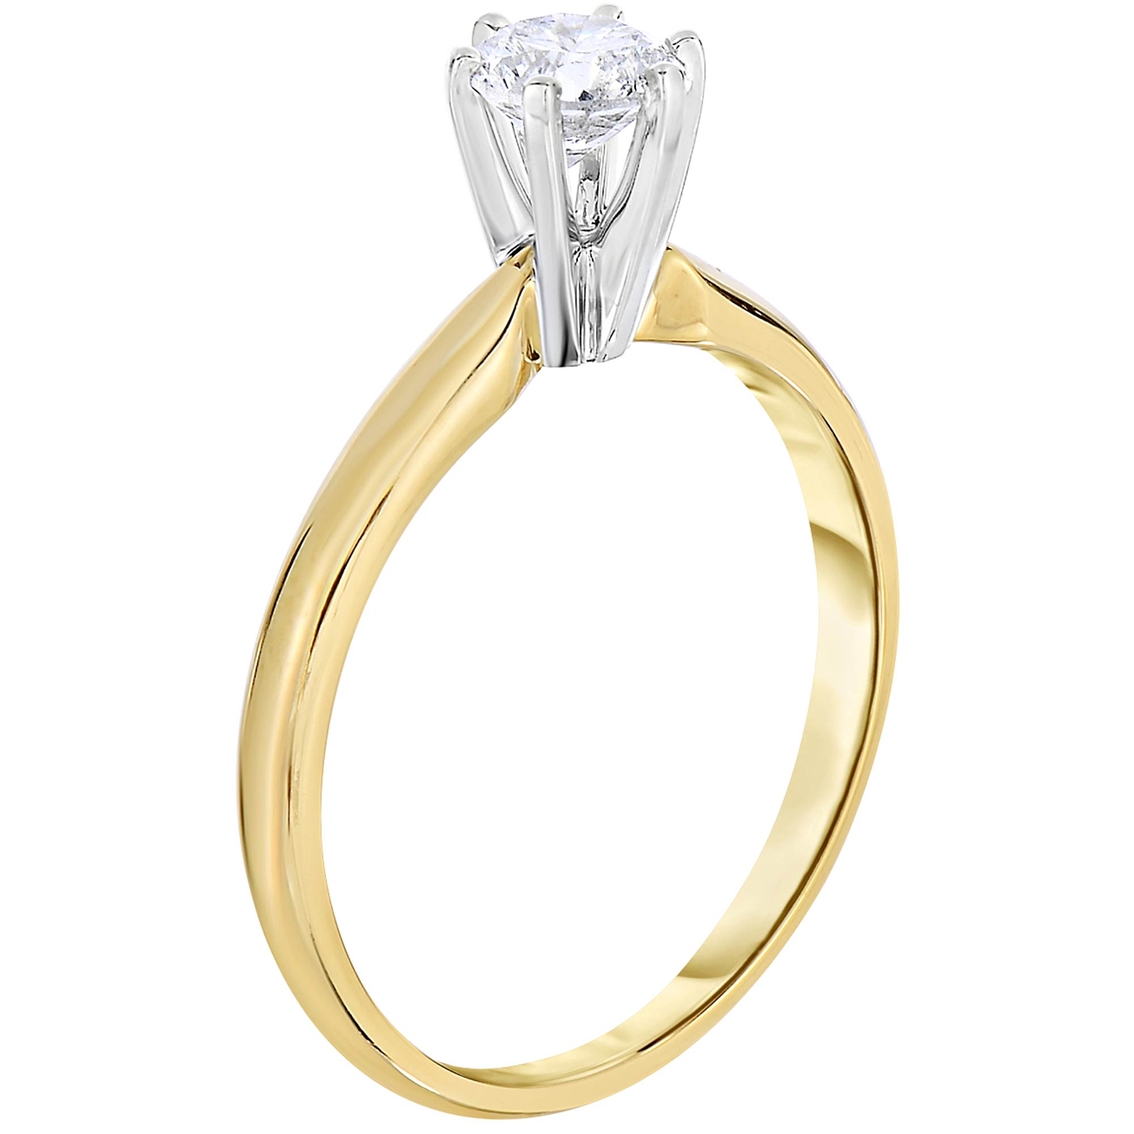 14K Gold 1/2 ct. Diamond Solitaire Engagement Ring - Image 2 of 2